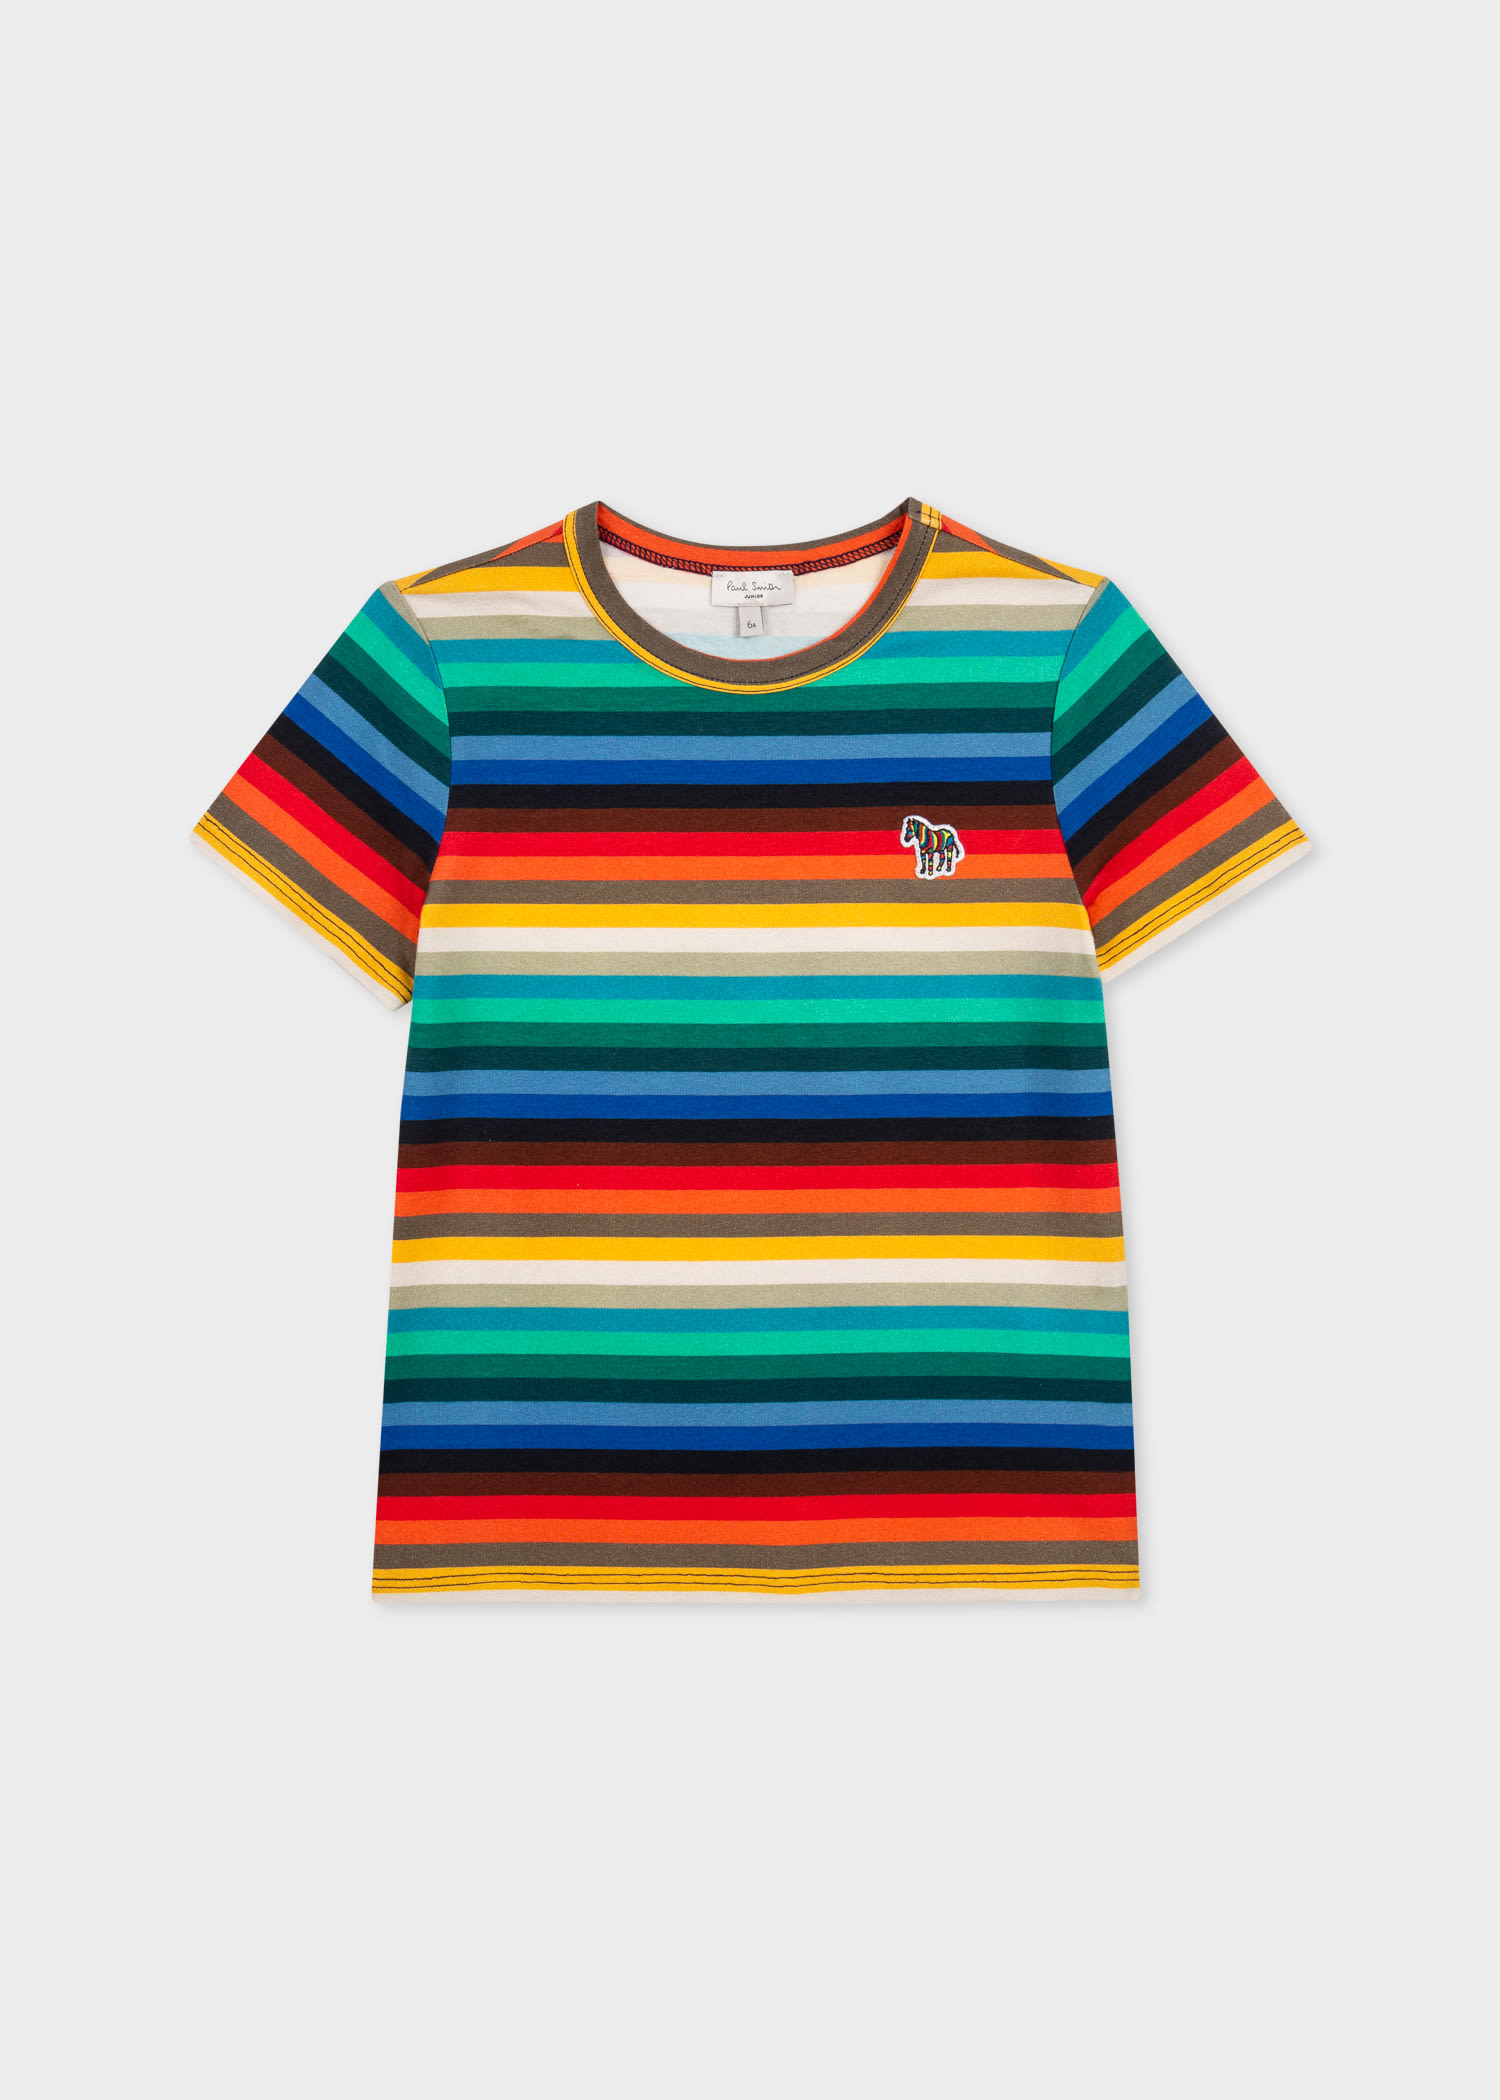 Designer Clothing and Accessories For Children - Paul Smith